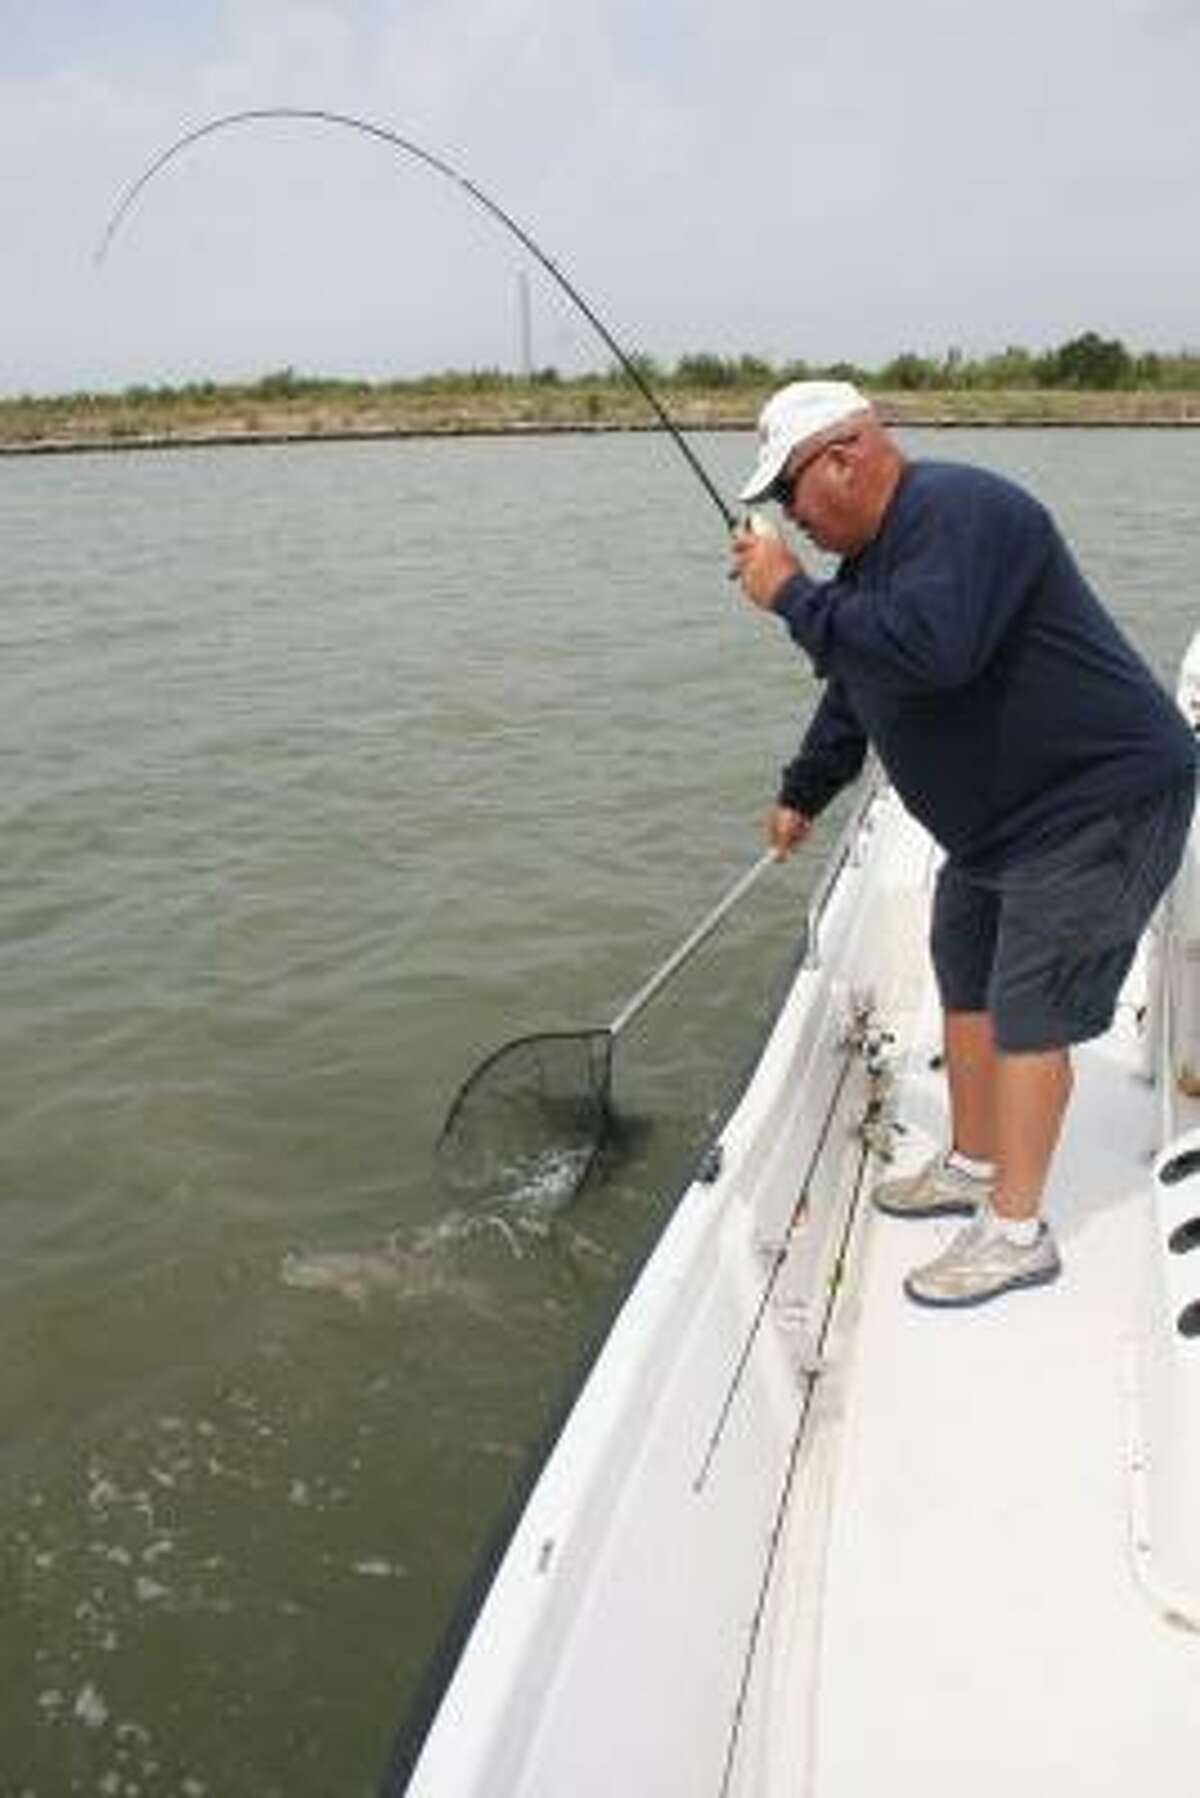 The catch rate of redfish in this spring's standardized gill net sampling of Galveston Bay was the highest recorded since the surveys began in the early 1980s.